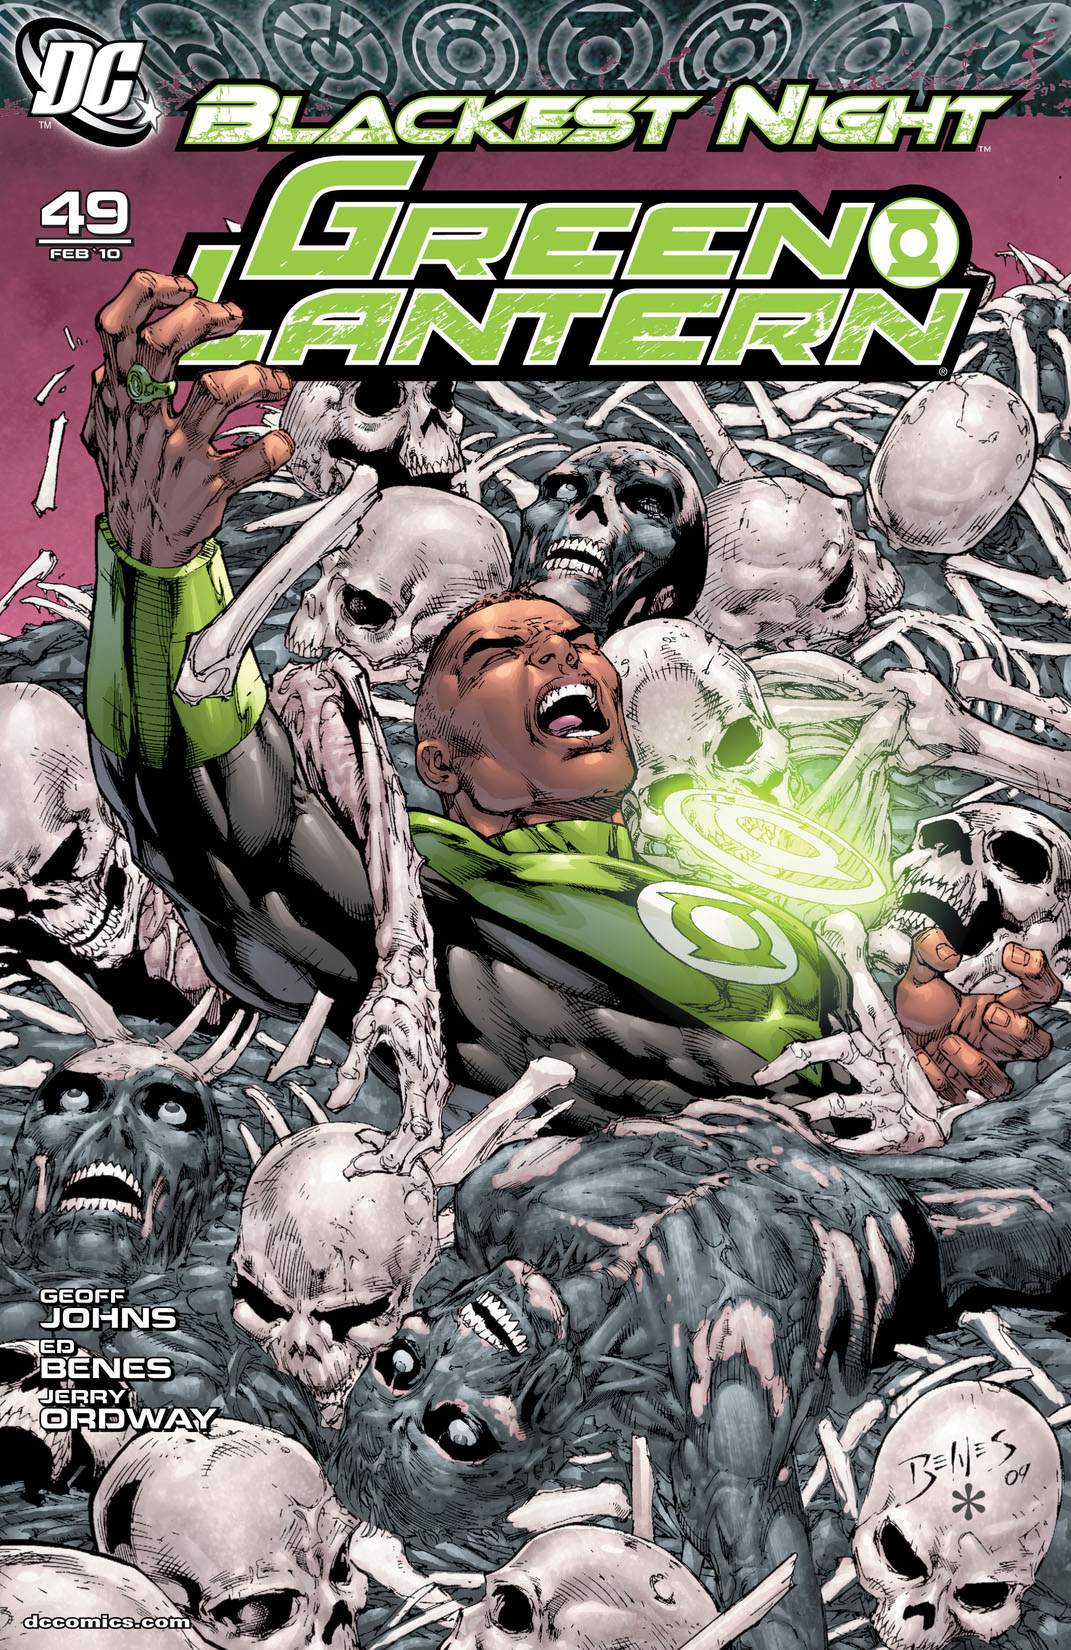 Green Lantern (2005-) #49 preview images